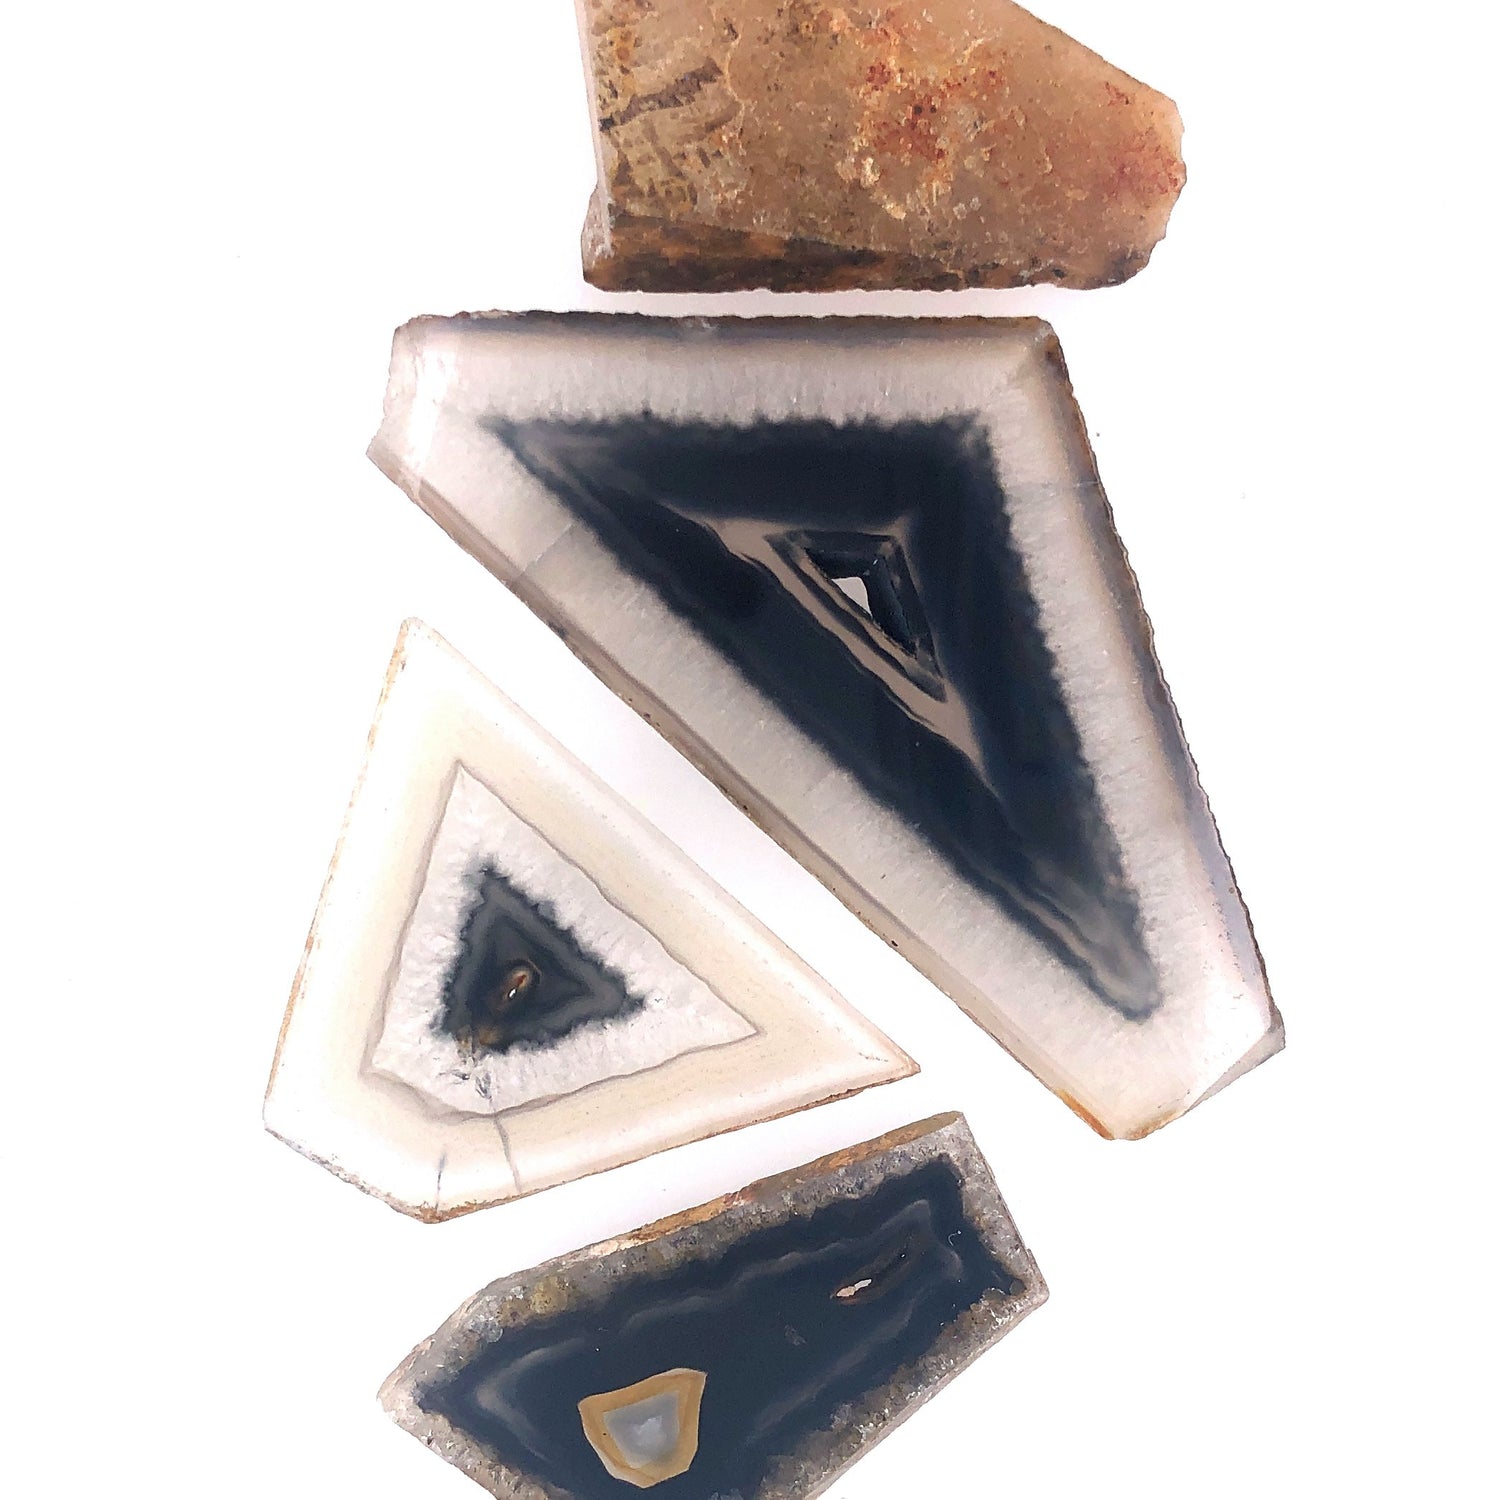 material: polyhedroid agate